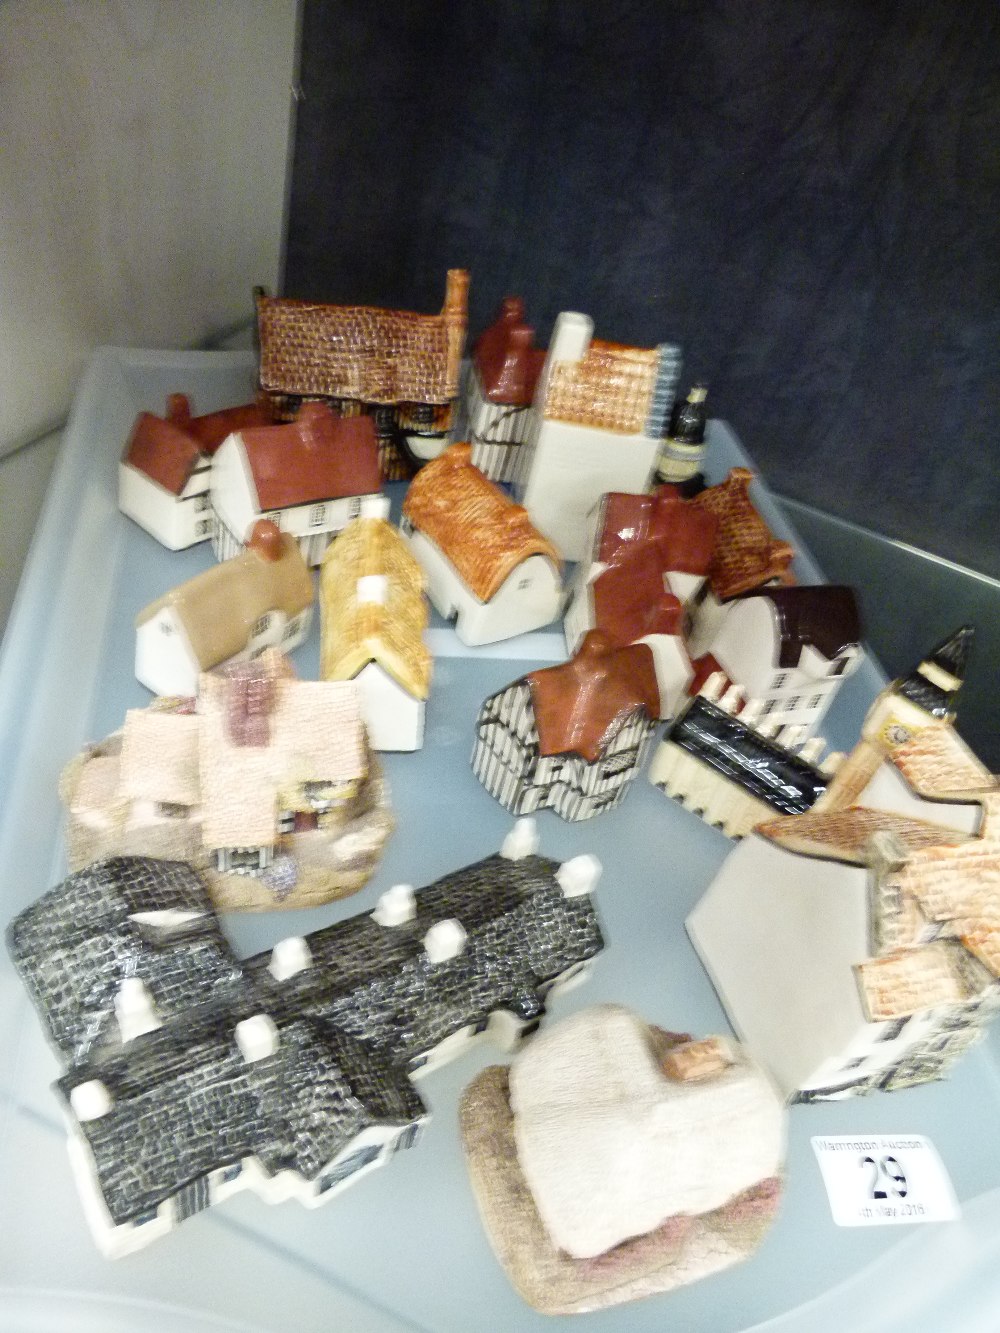 Ceramic and resin cottages including Lilliput Lane examples